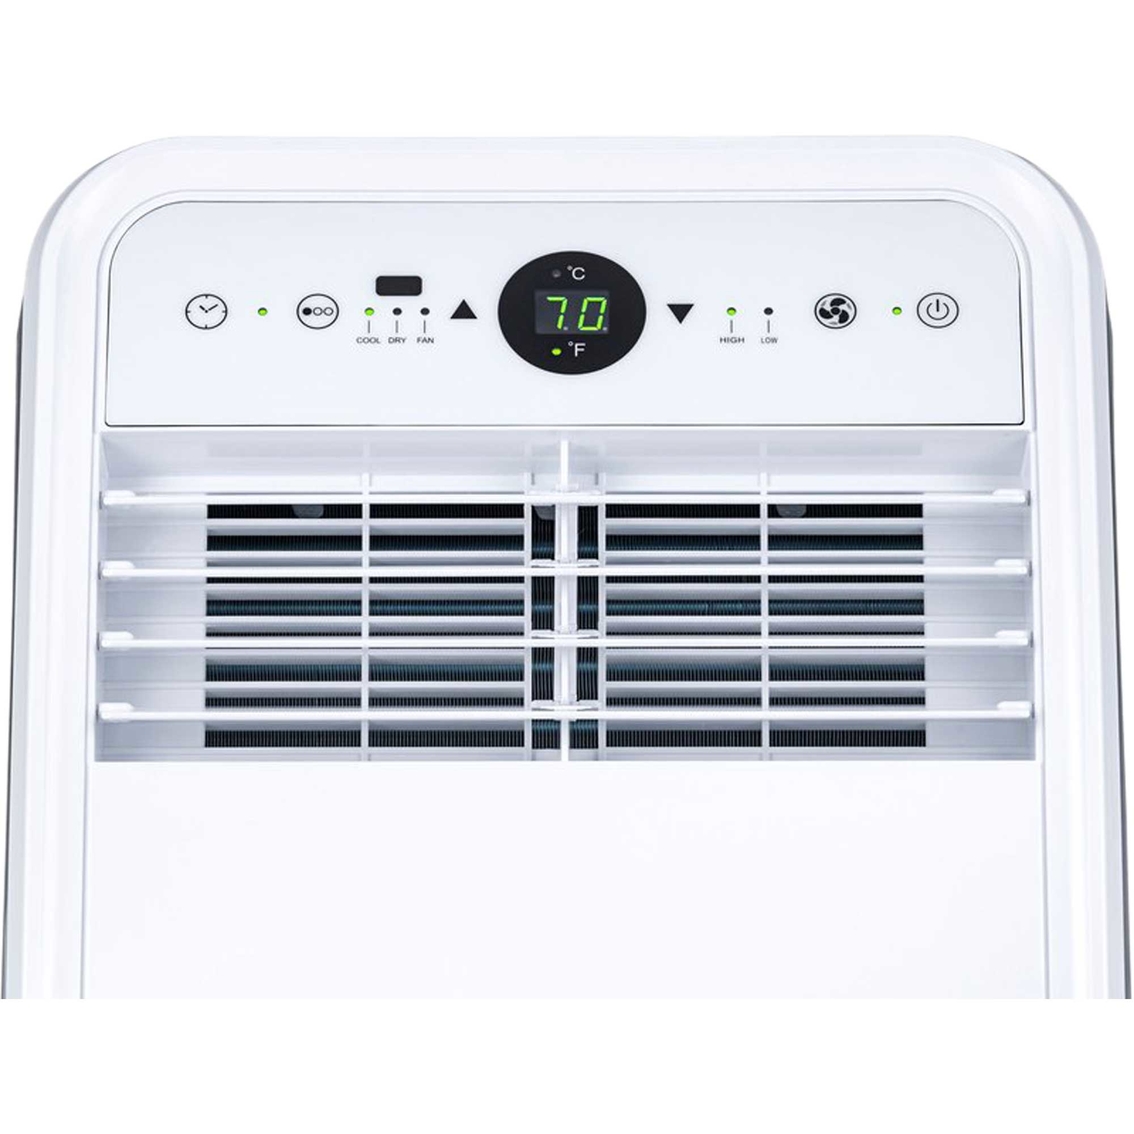 NewAir Compact 8,000 BTU Portable Air Conditioner - Image 9 of 10